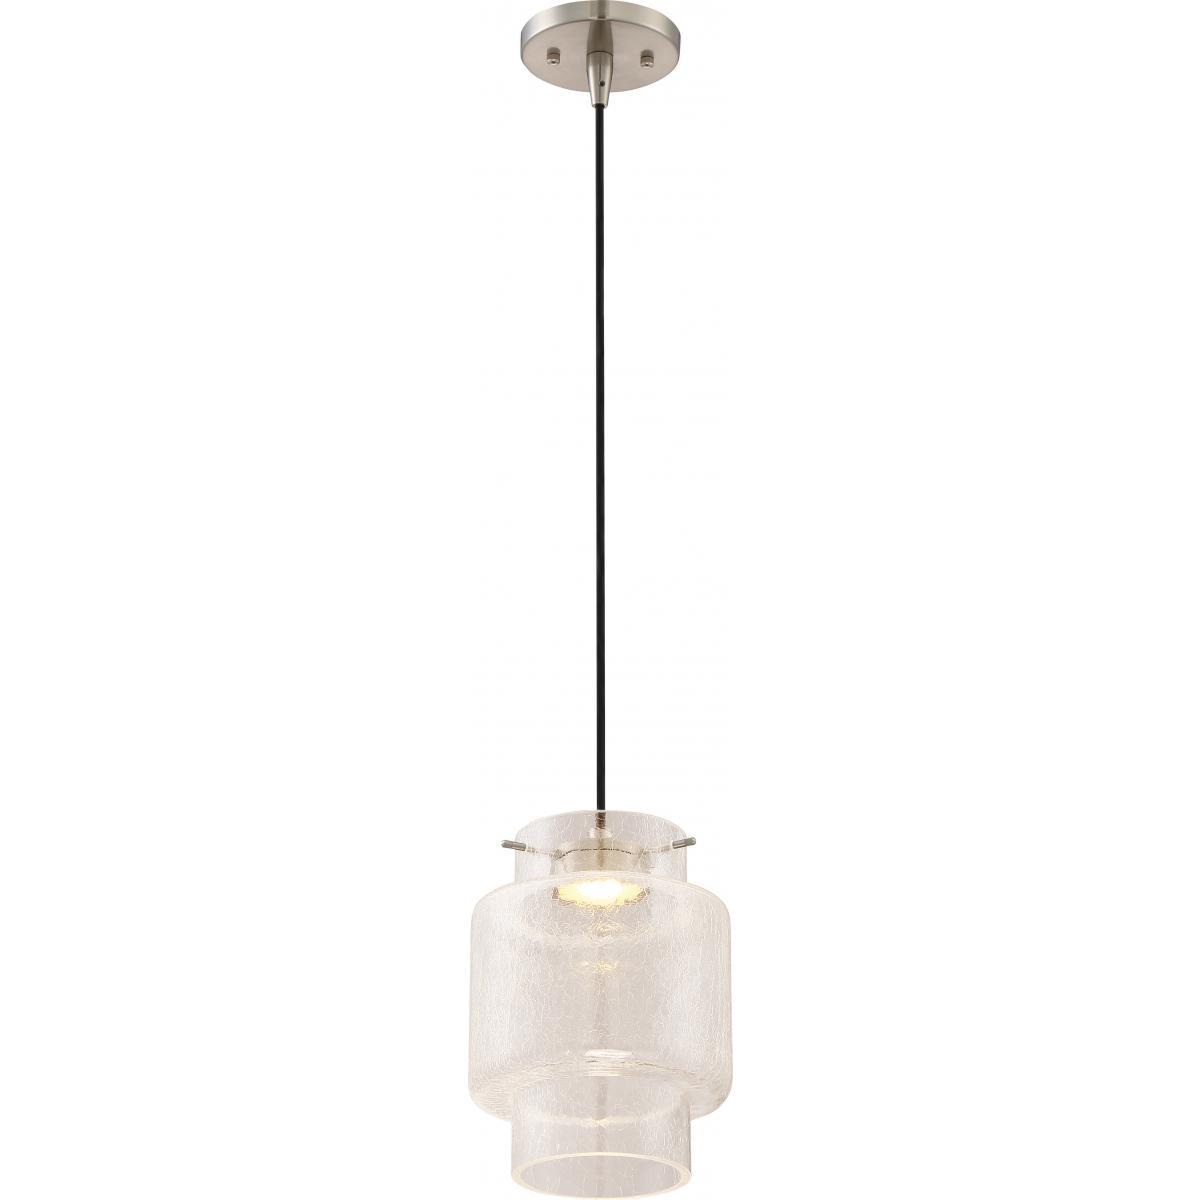 Del LED Mini Pendant with Clear Crackle Glass Brushed Nickel Finish Ceiling Nuvo Lighting 